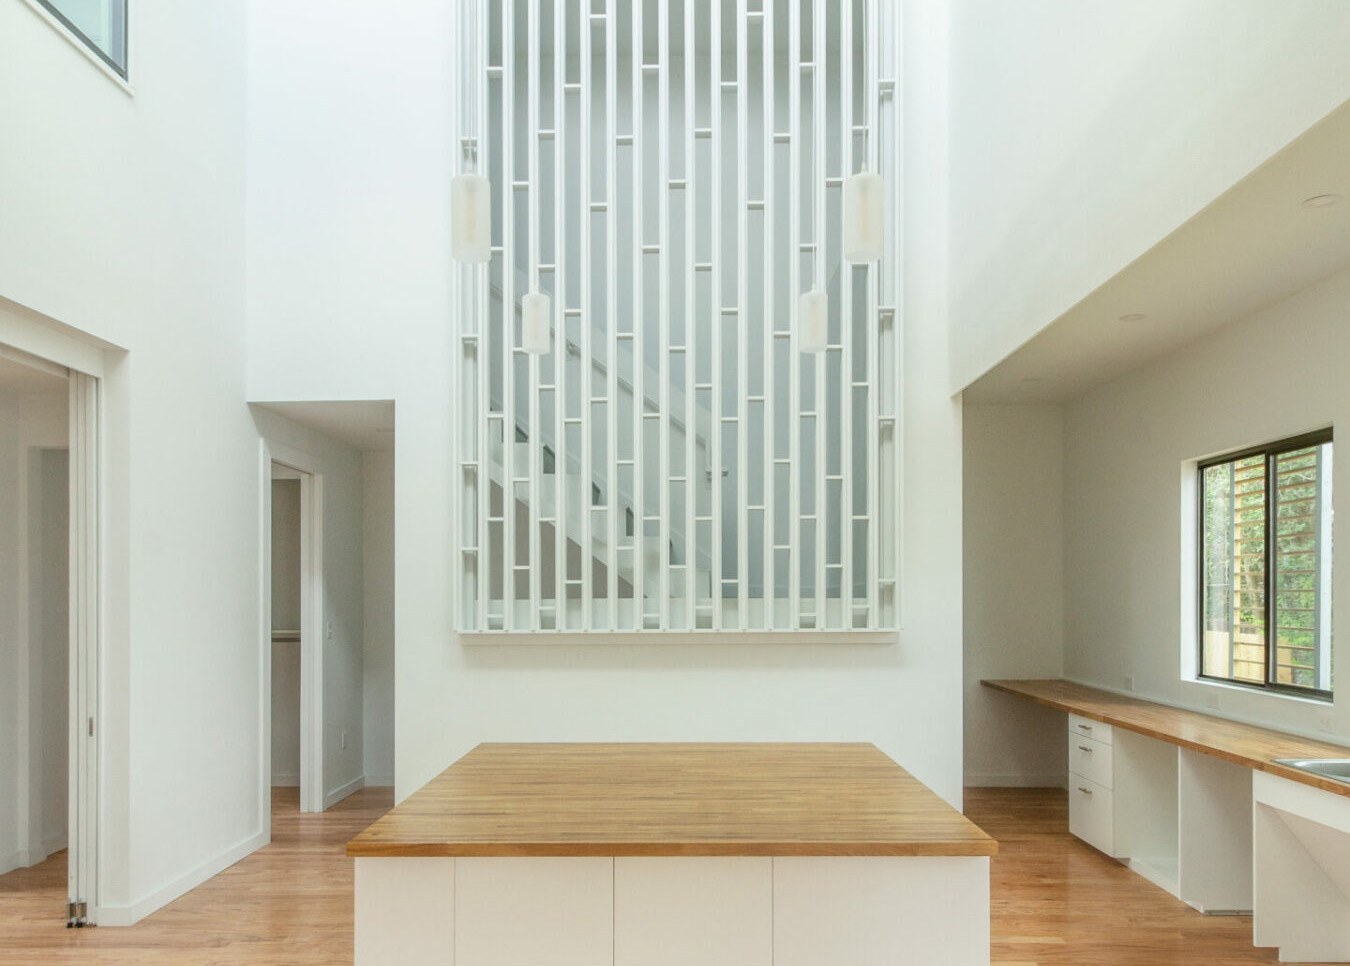 Interior of high-ceiling kitchen space with vertical-slat screen feature built in the foreground with staircase behind the screen